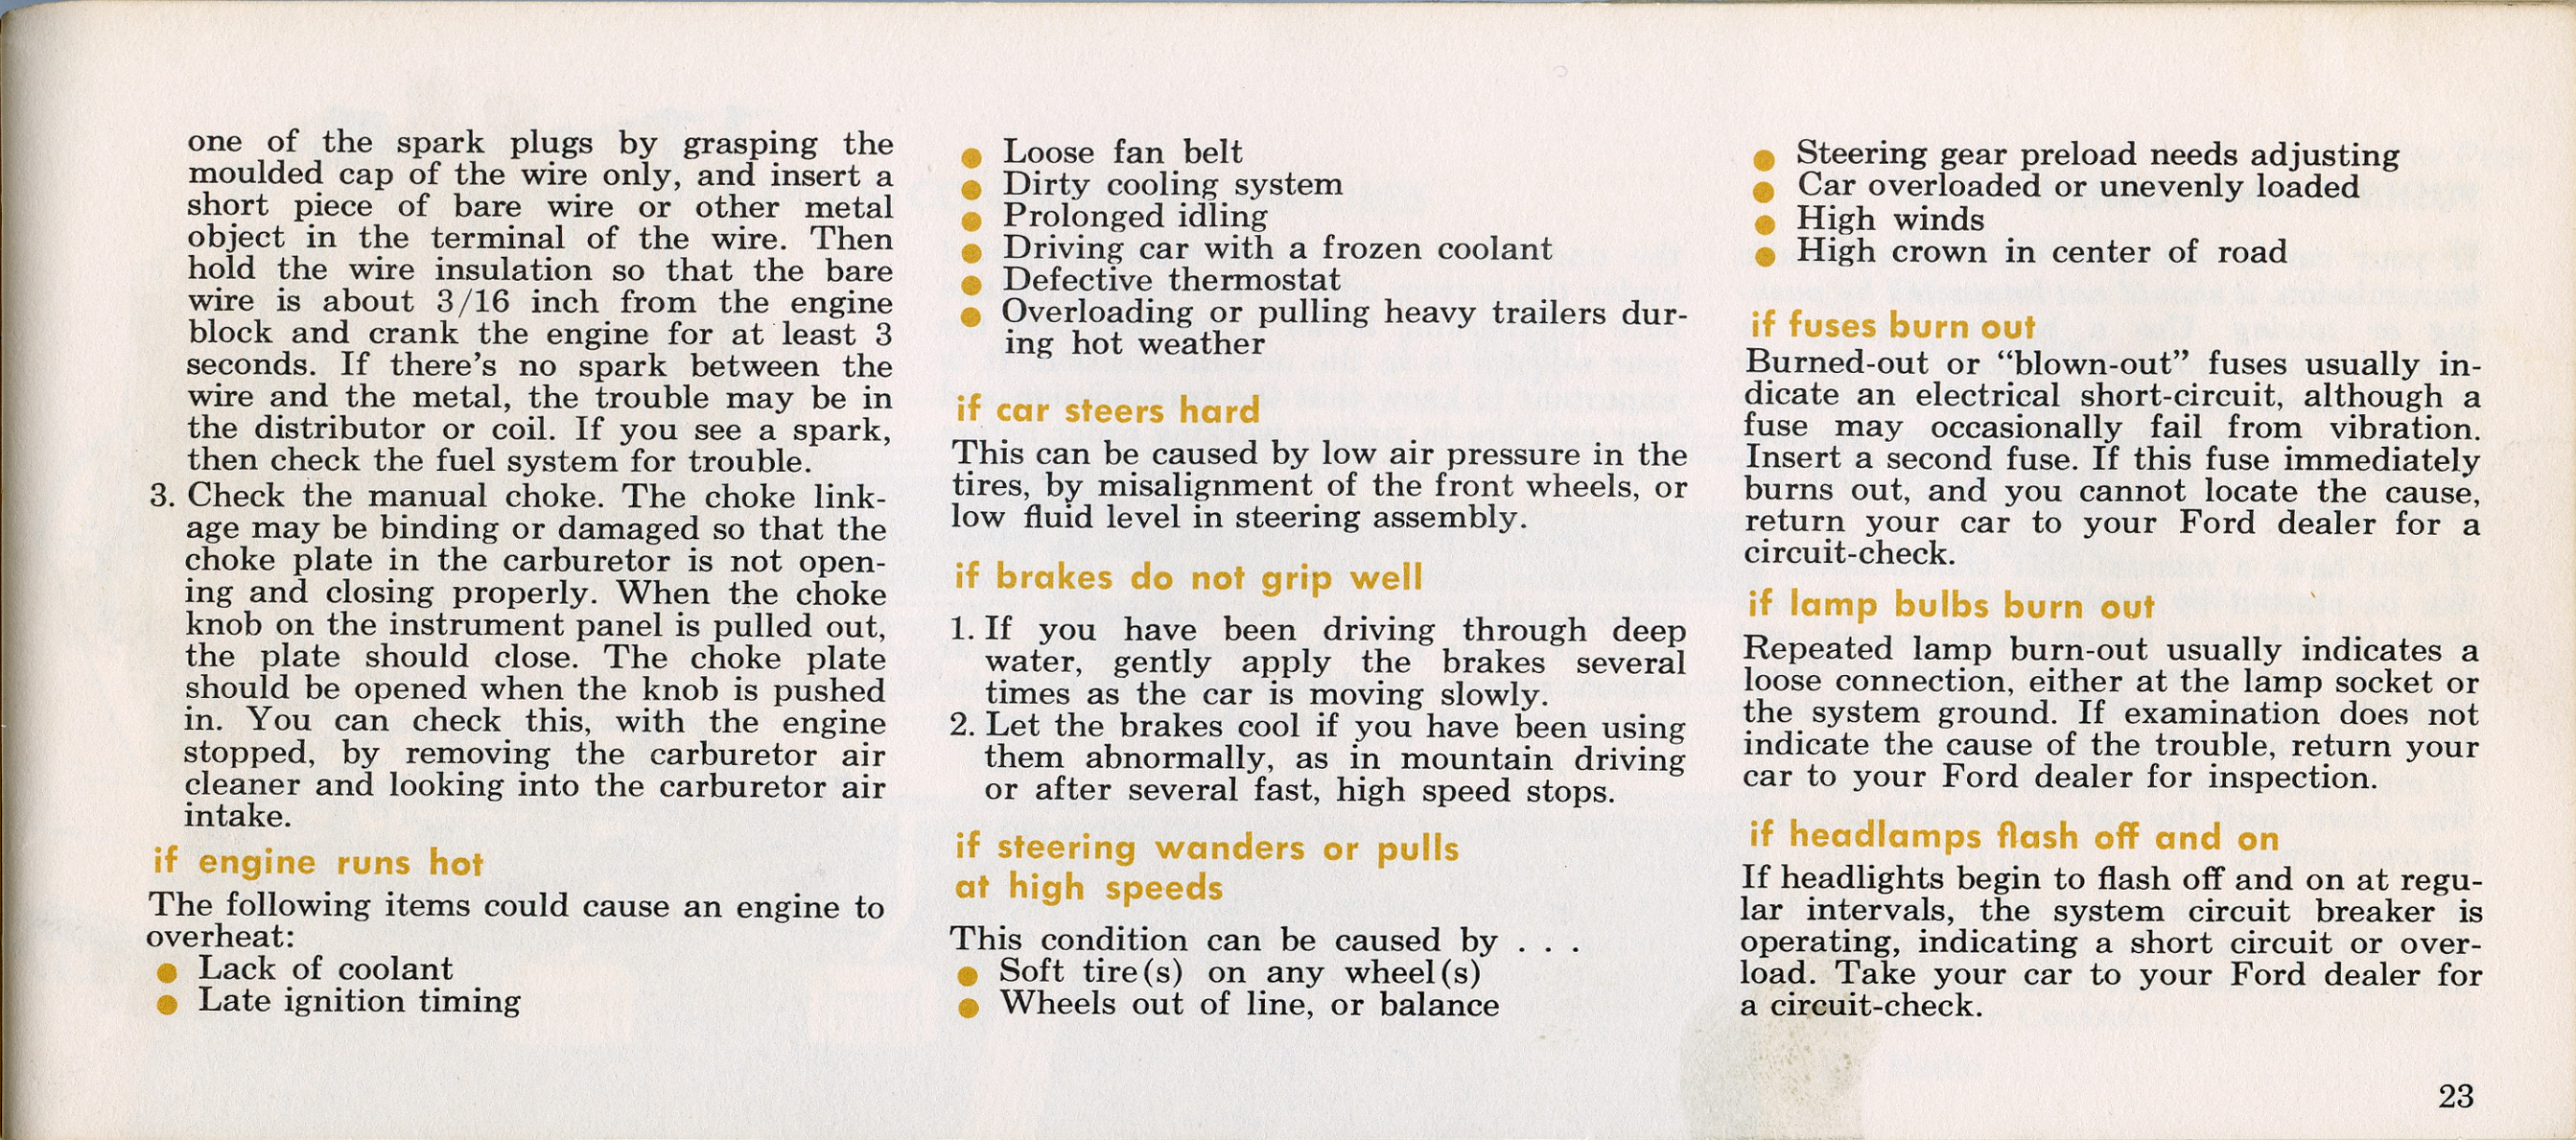 1964 Ford Falcon Owners Manual-23